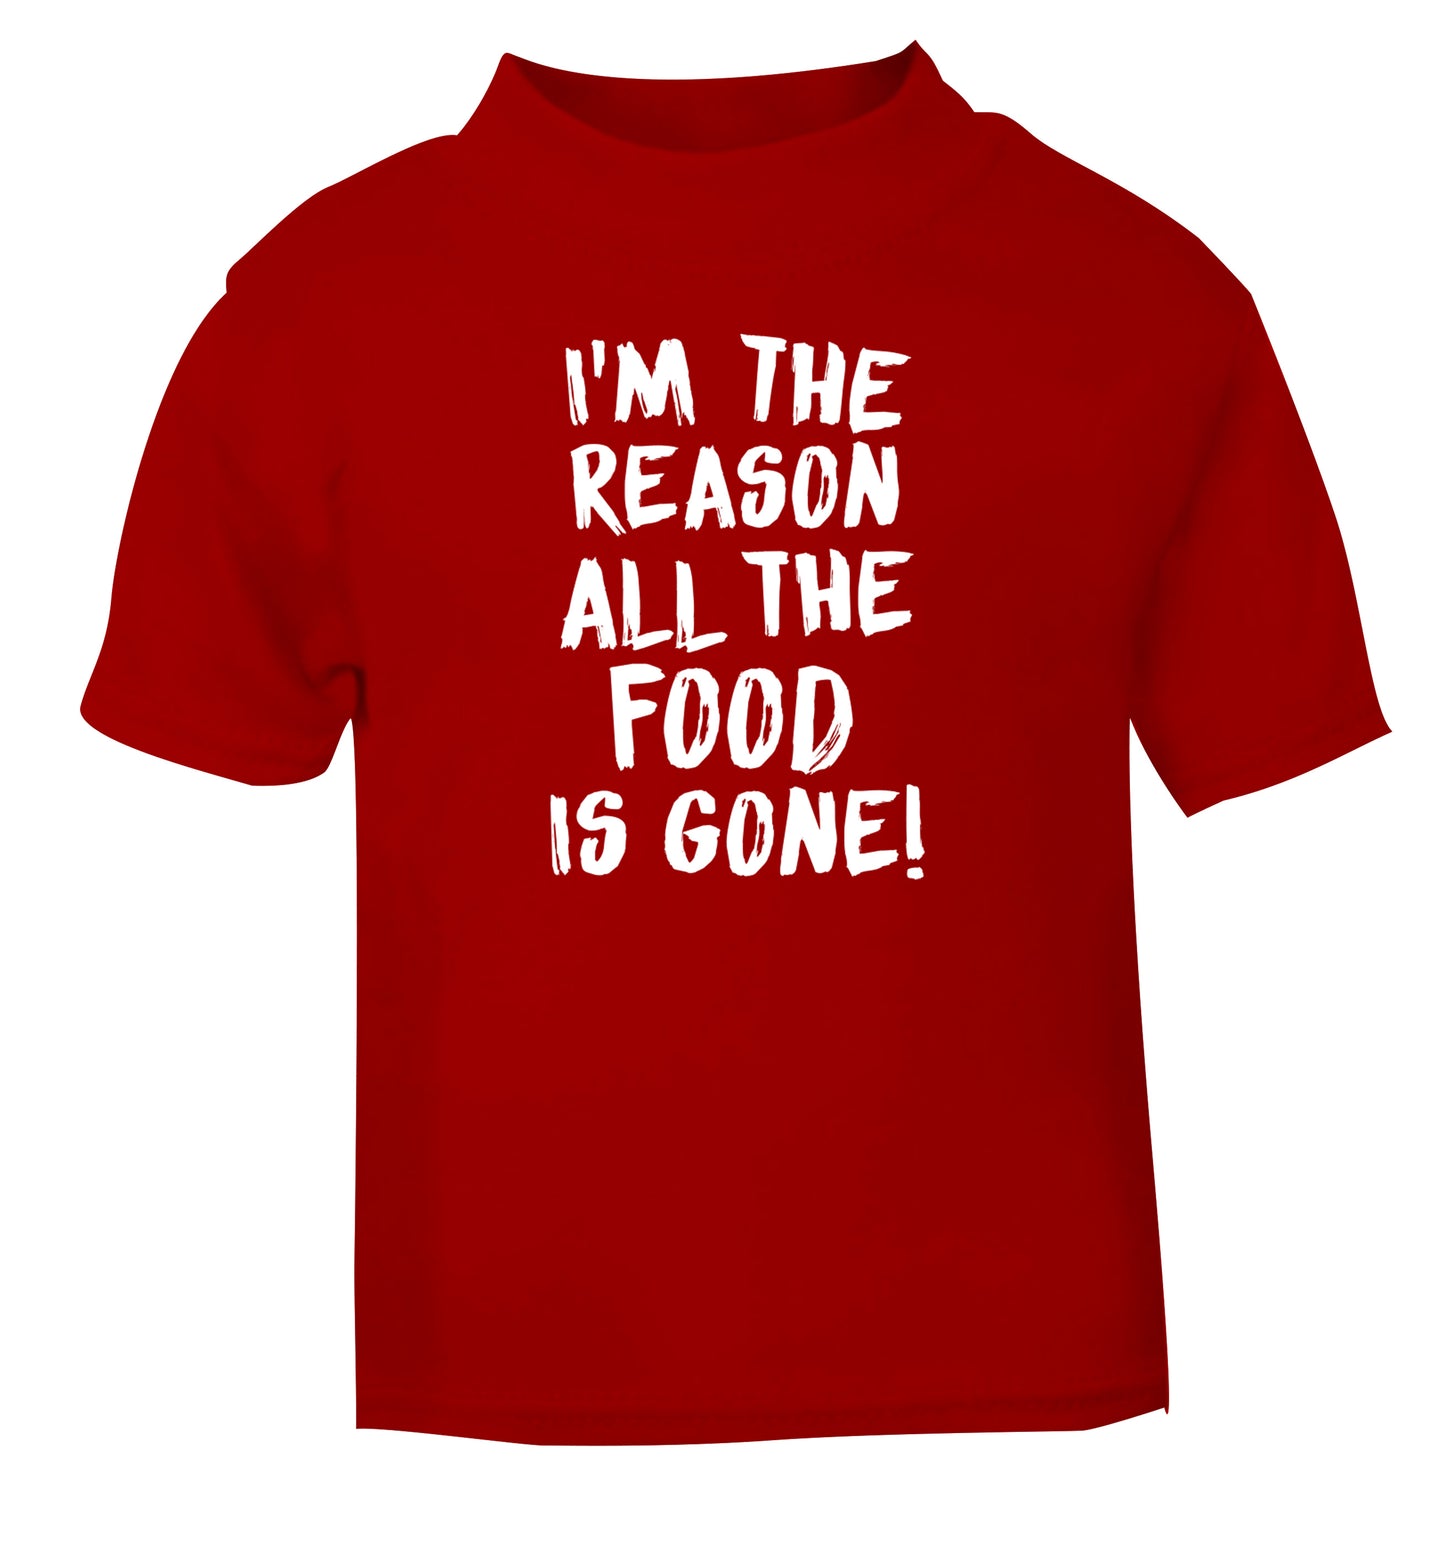 I'm the reason why all the food is gone red Baby Toddler Tshirt 2 Years